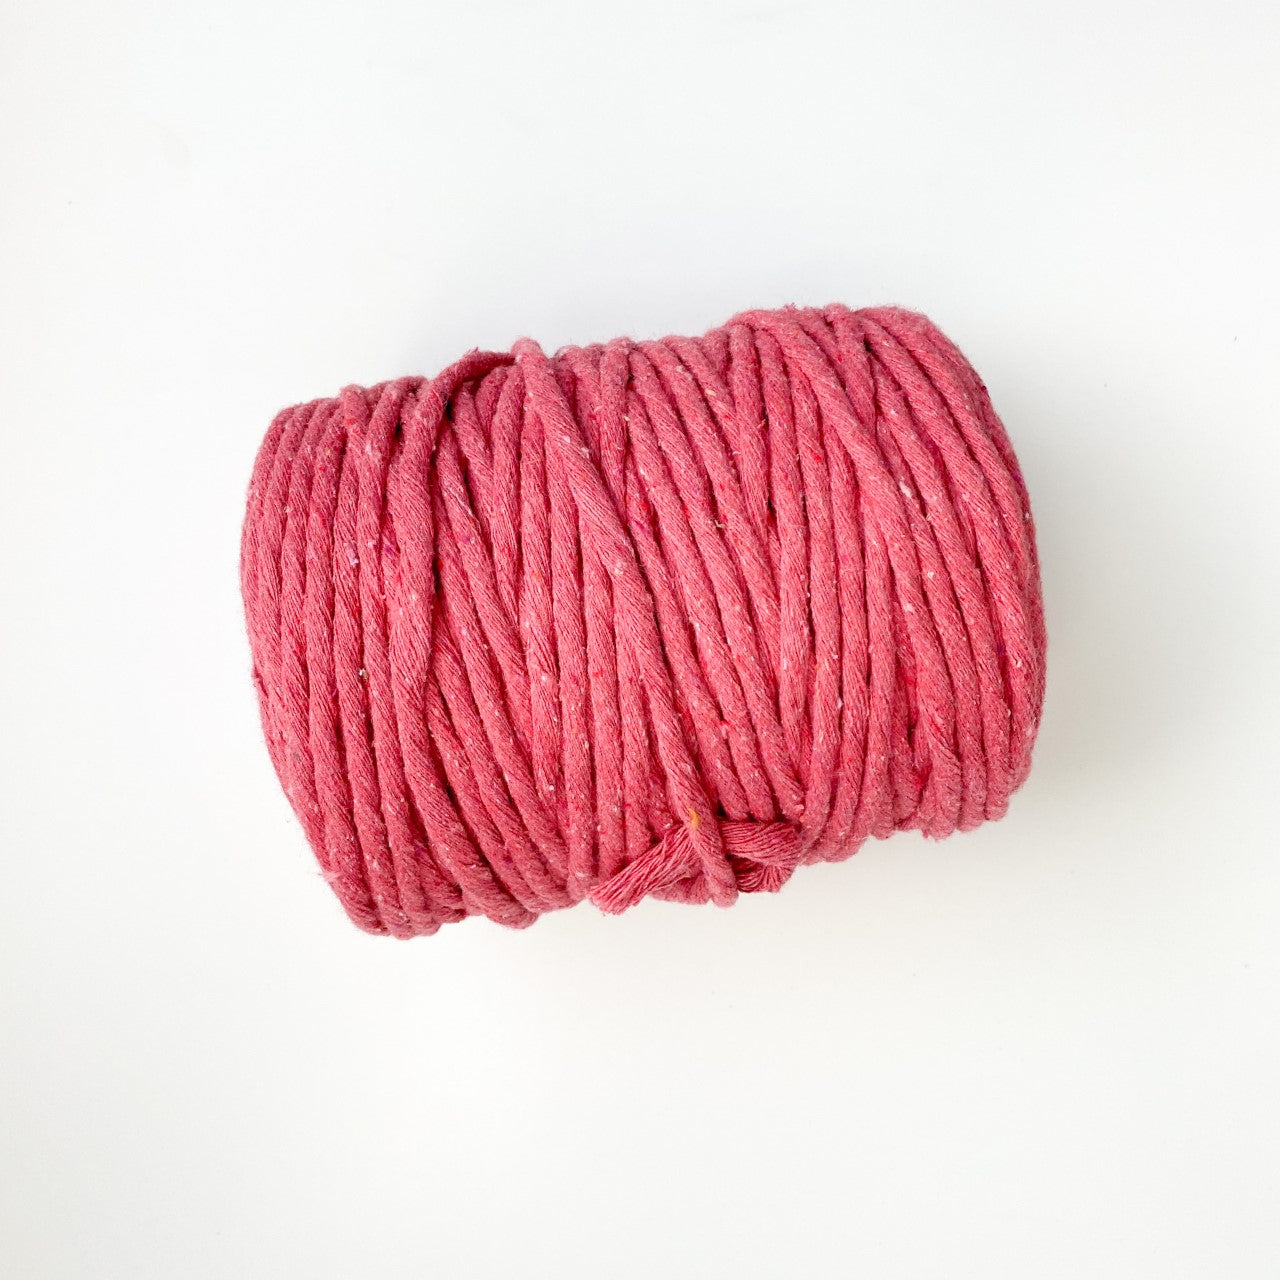 Large Roll of Rose Macrame Cord